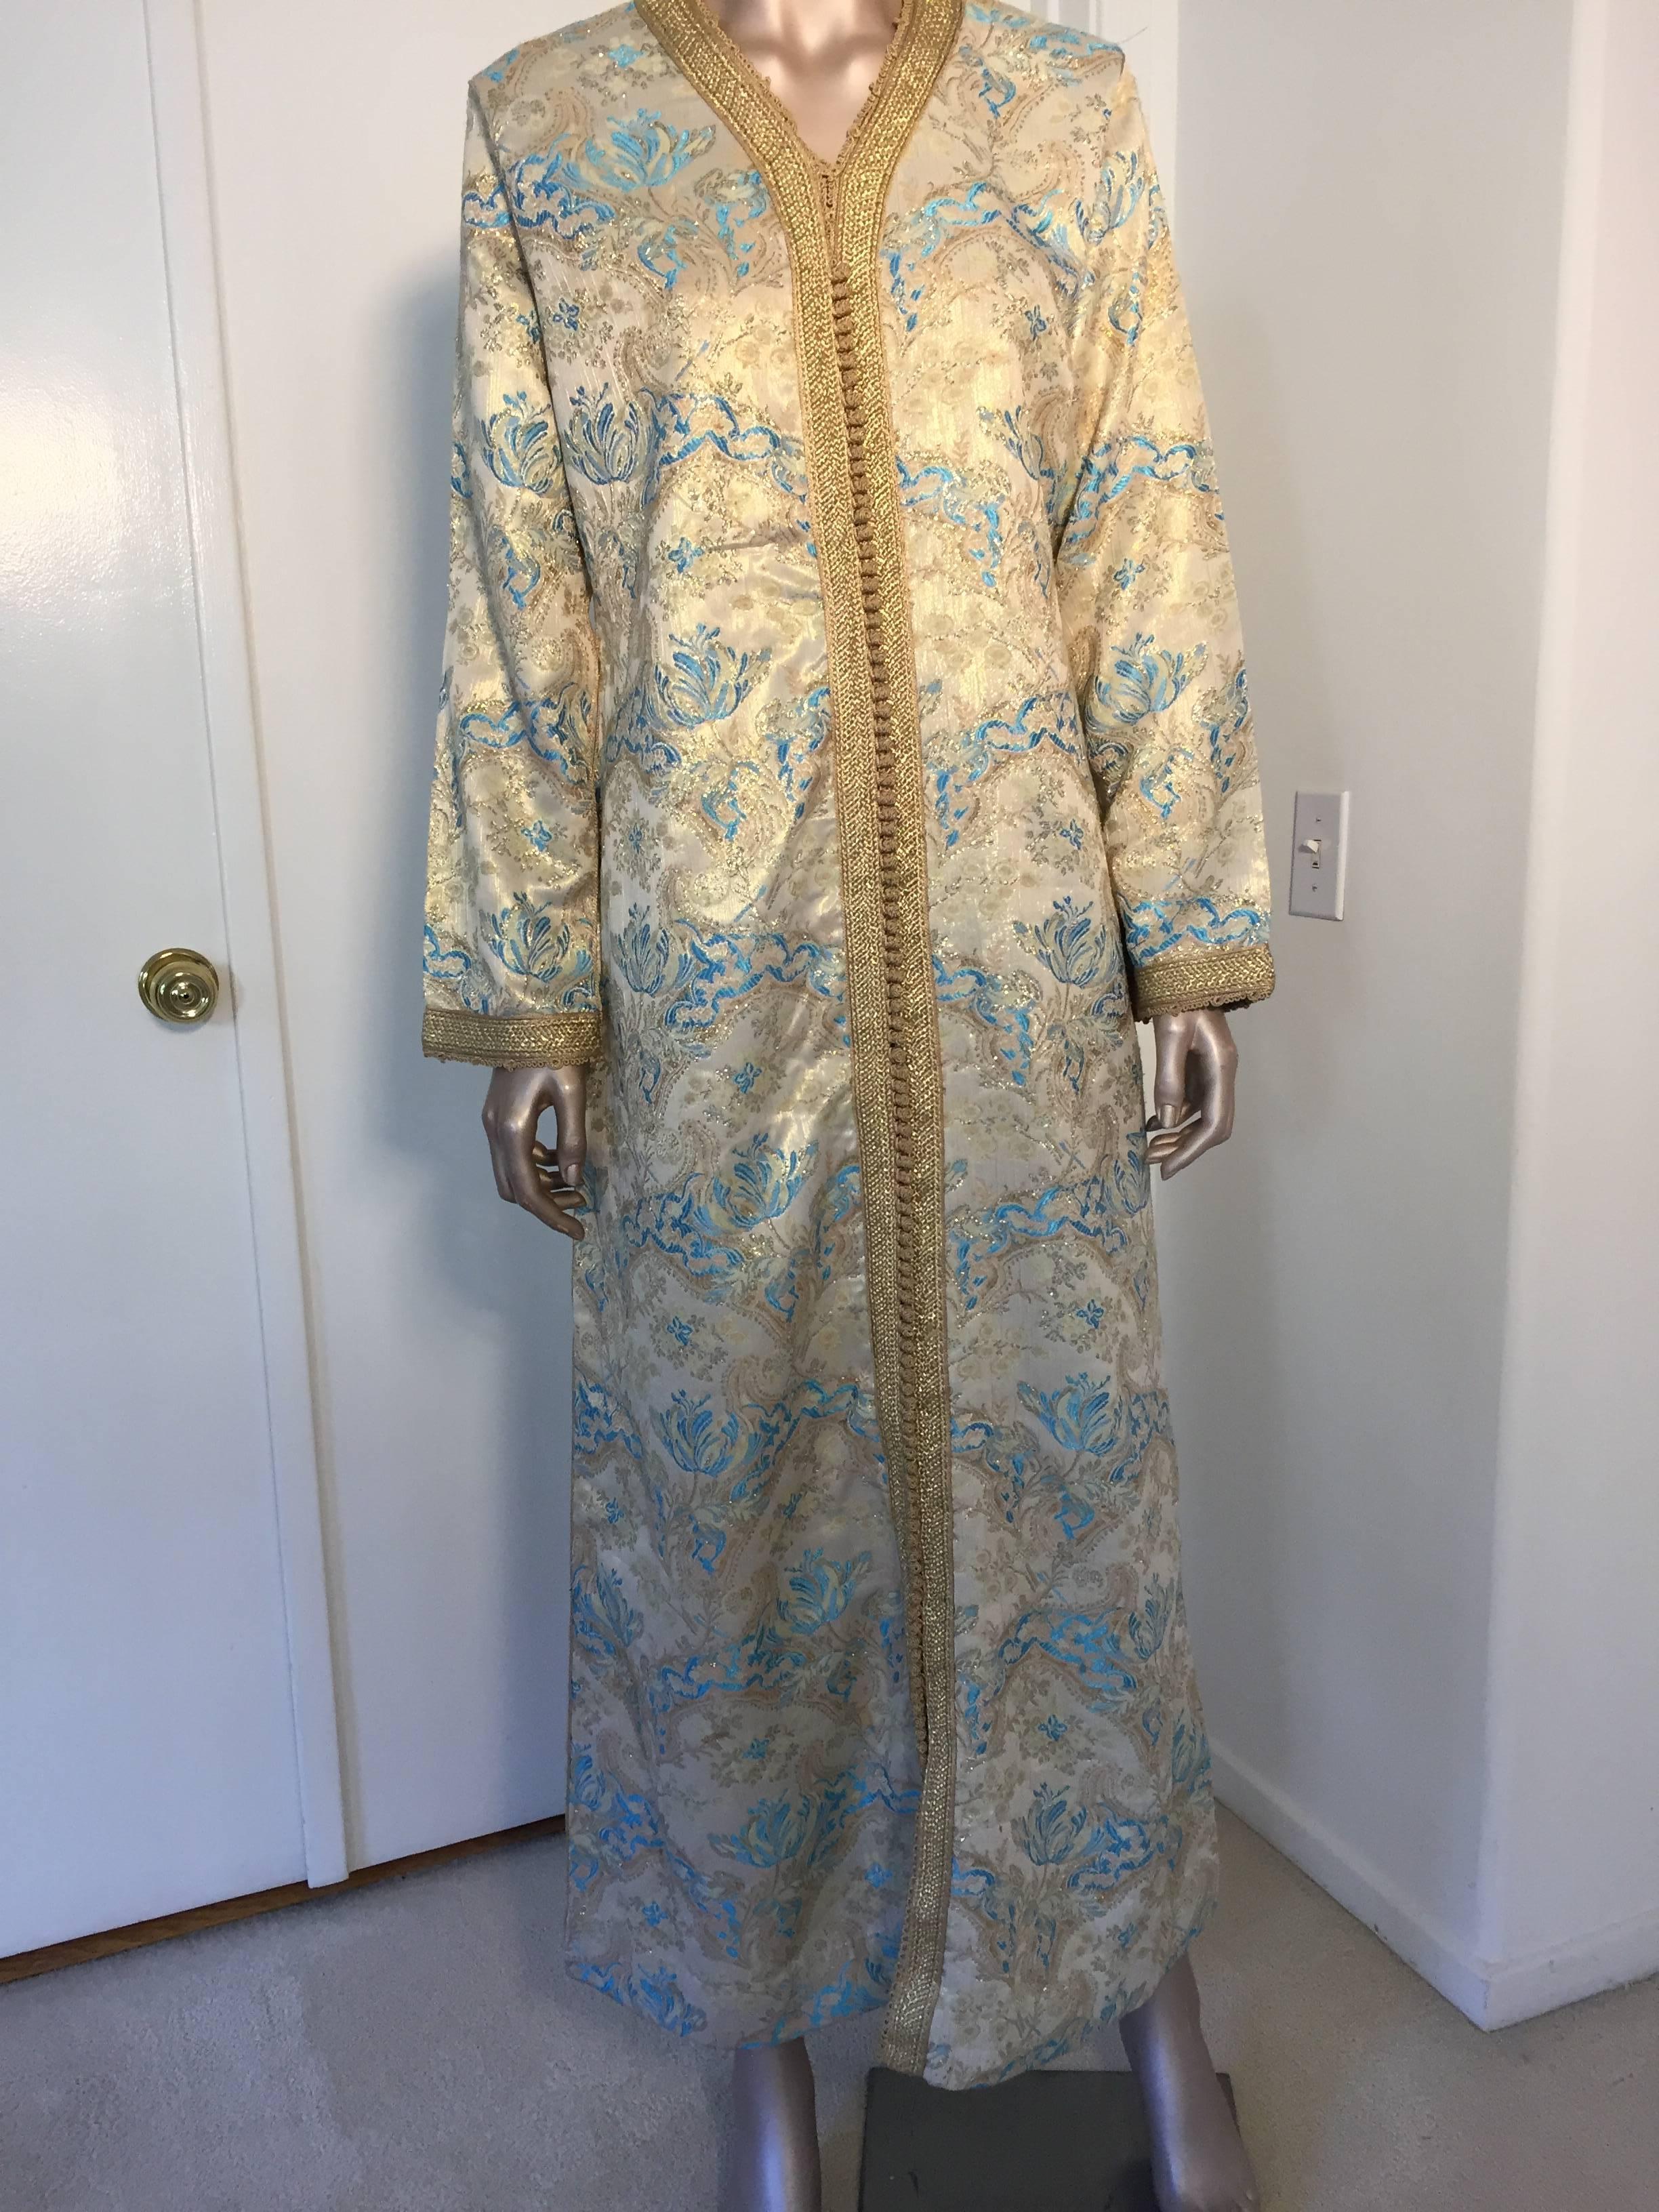 Moroccan Caftan, Turquoise and Gold Brocade Kaftan Size Medium For Sale 4